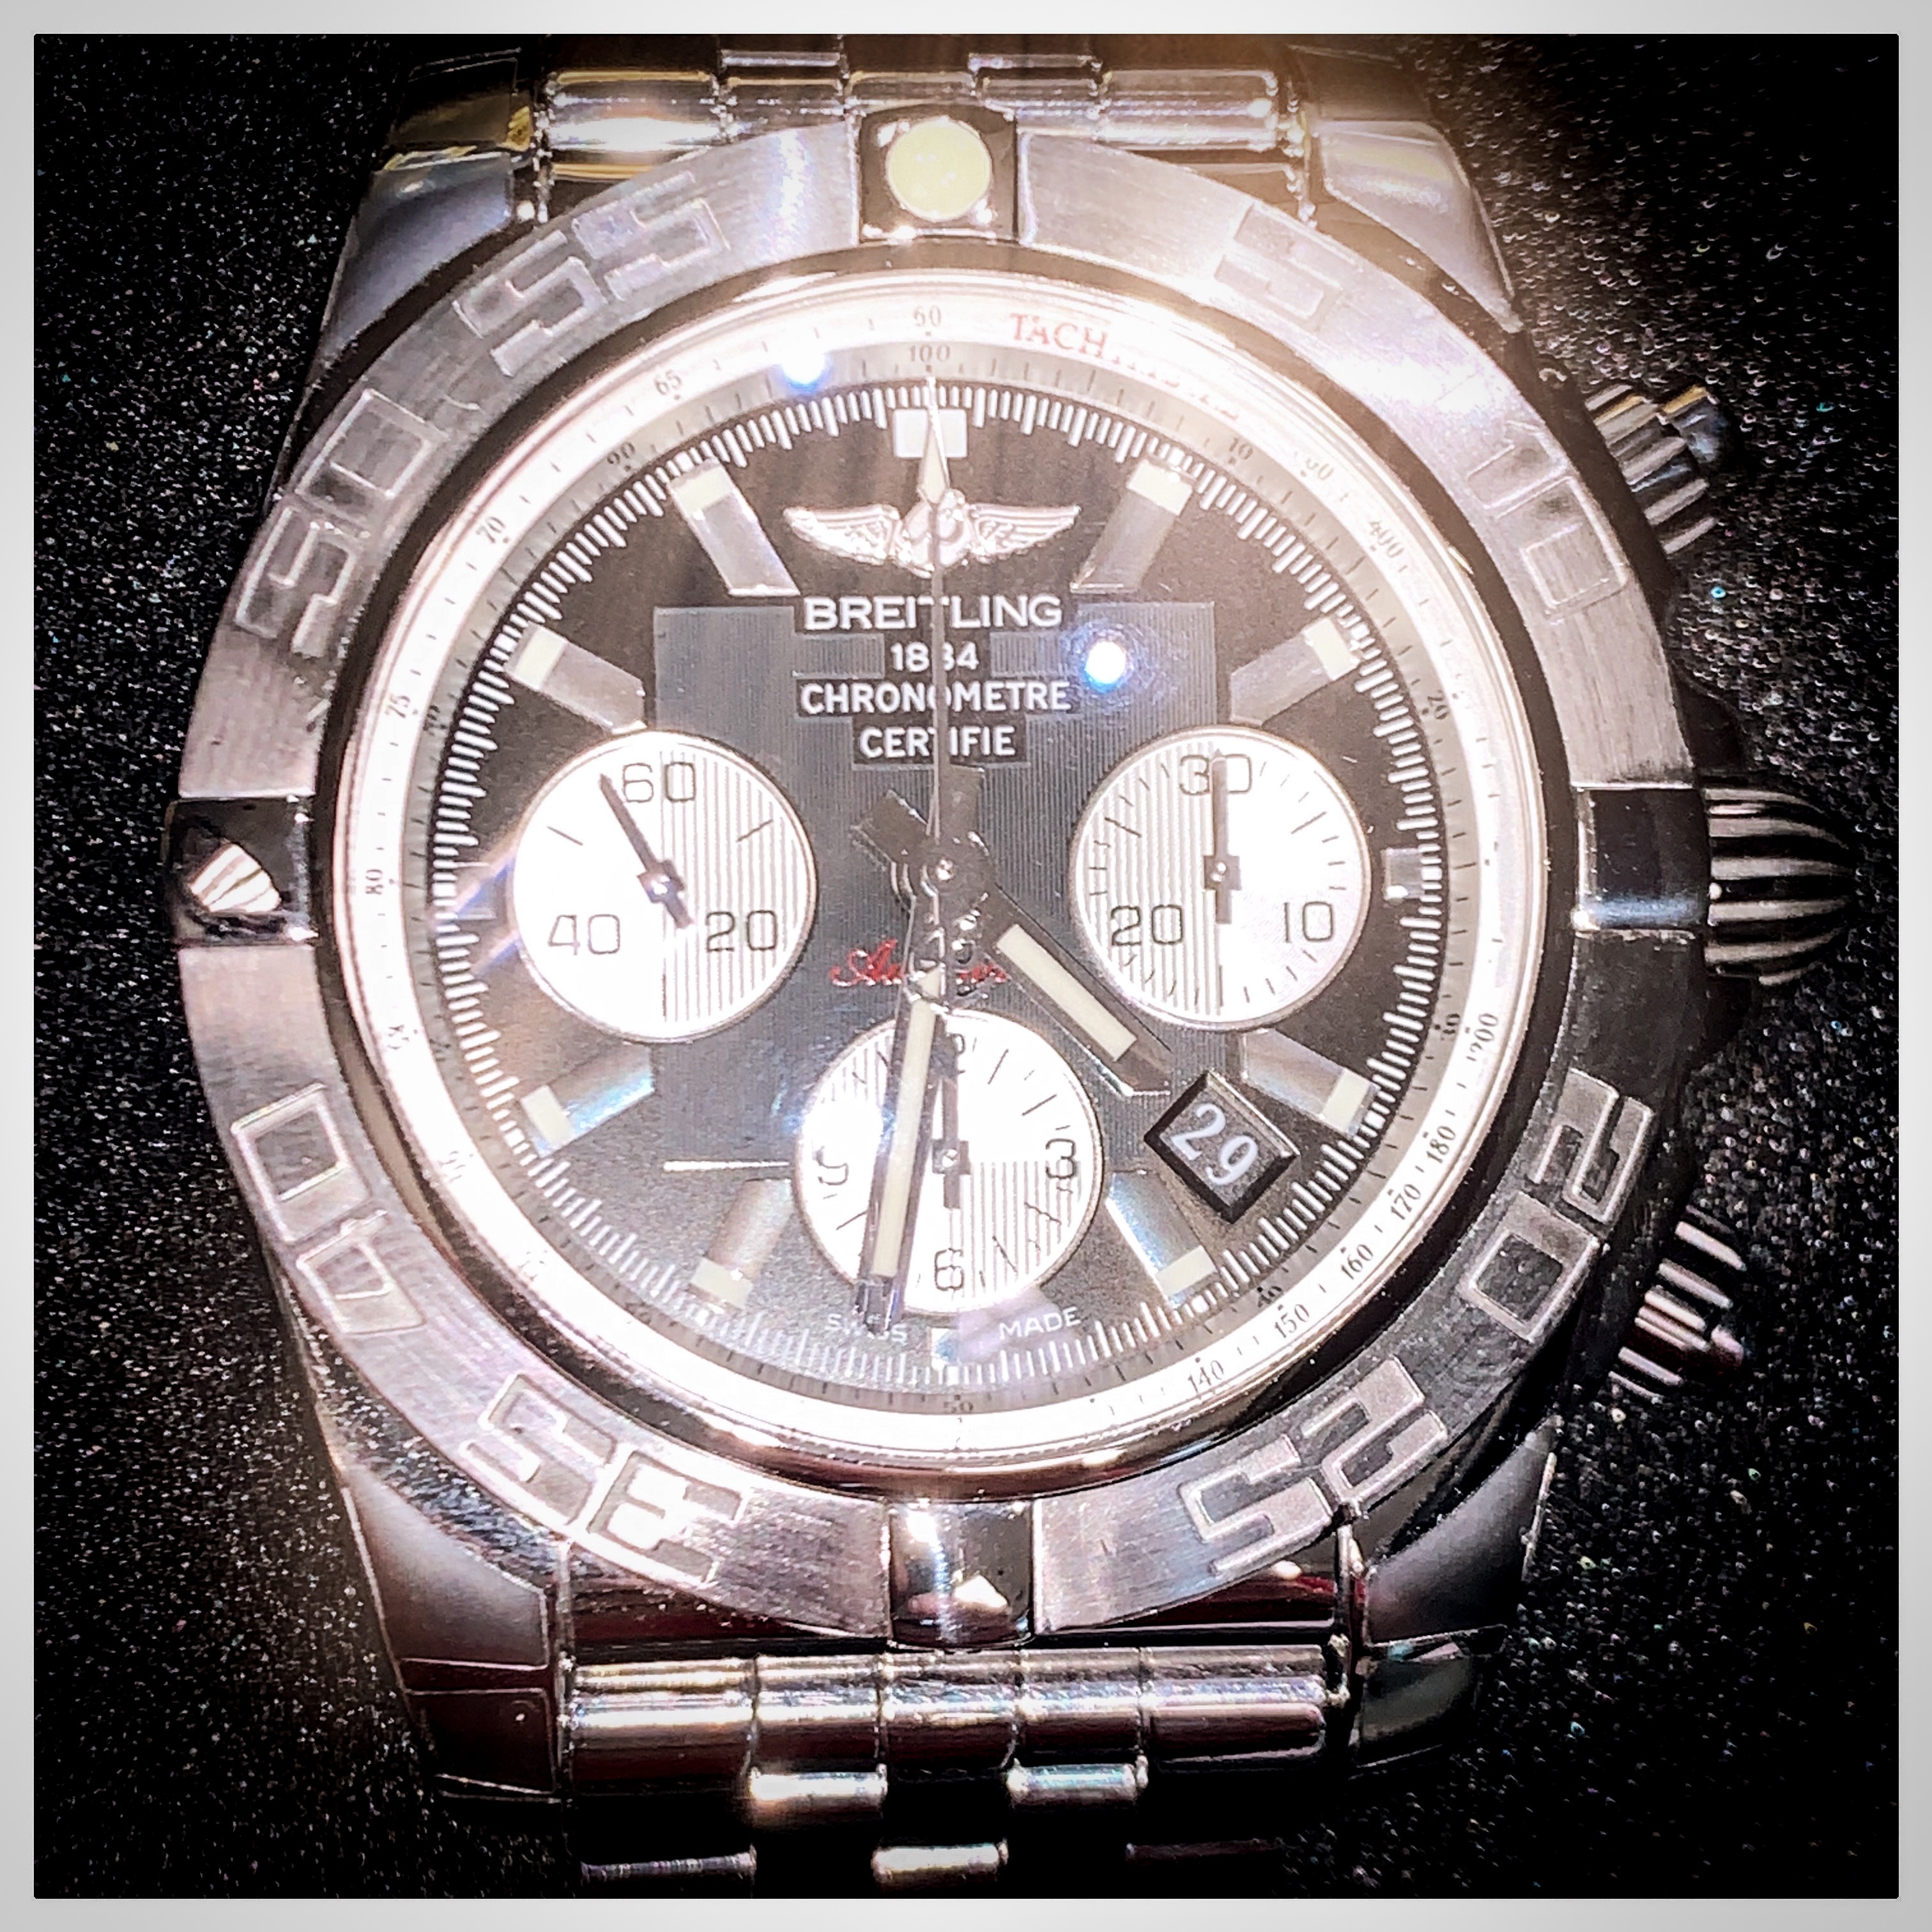 Repaired Breitling